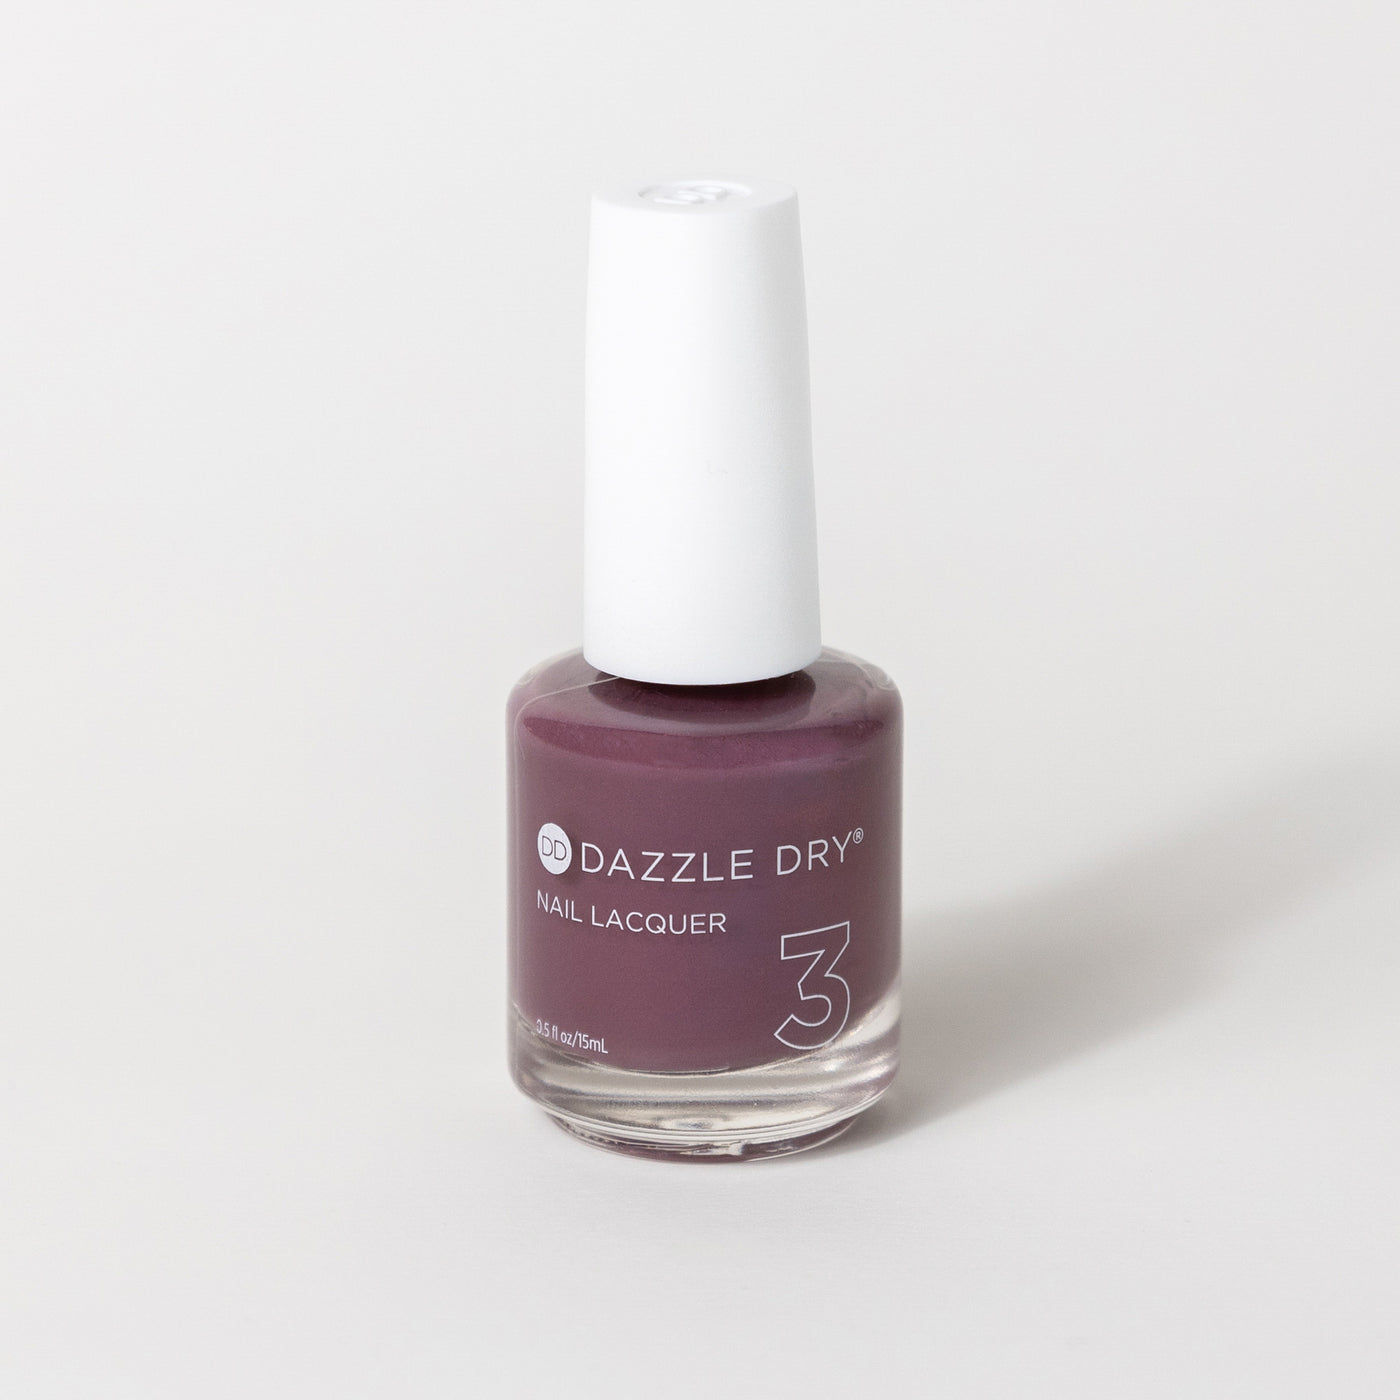 Celestial Dreams – Nail Lacquer by Dazzle Dry